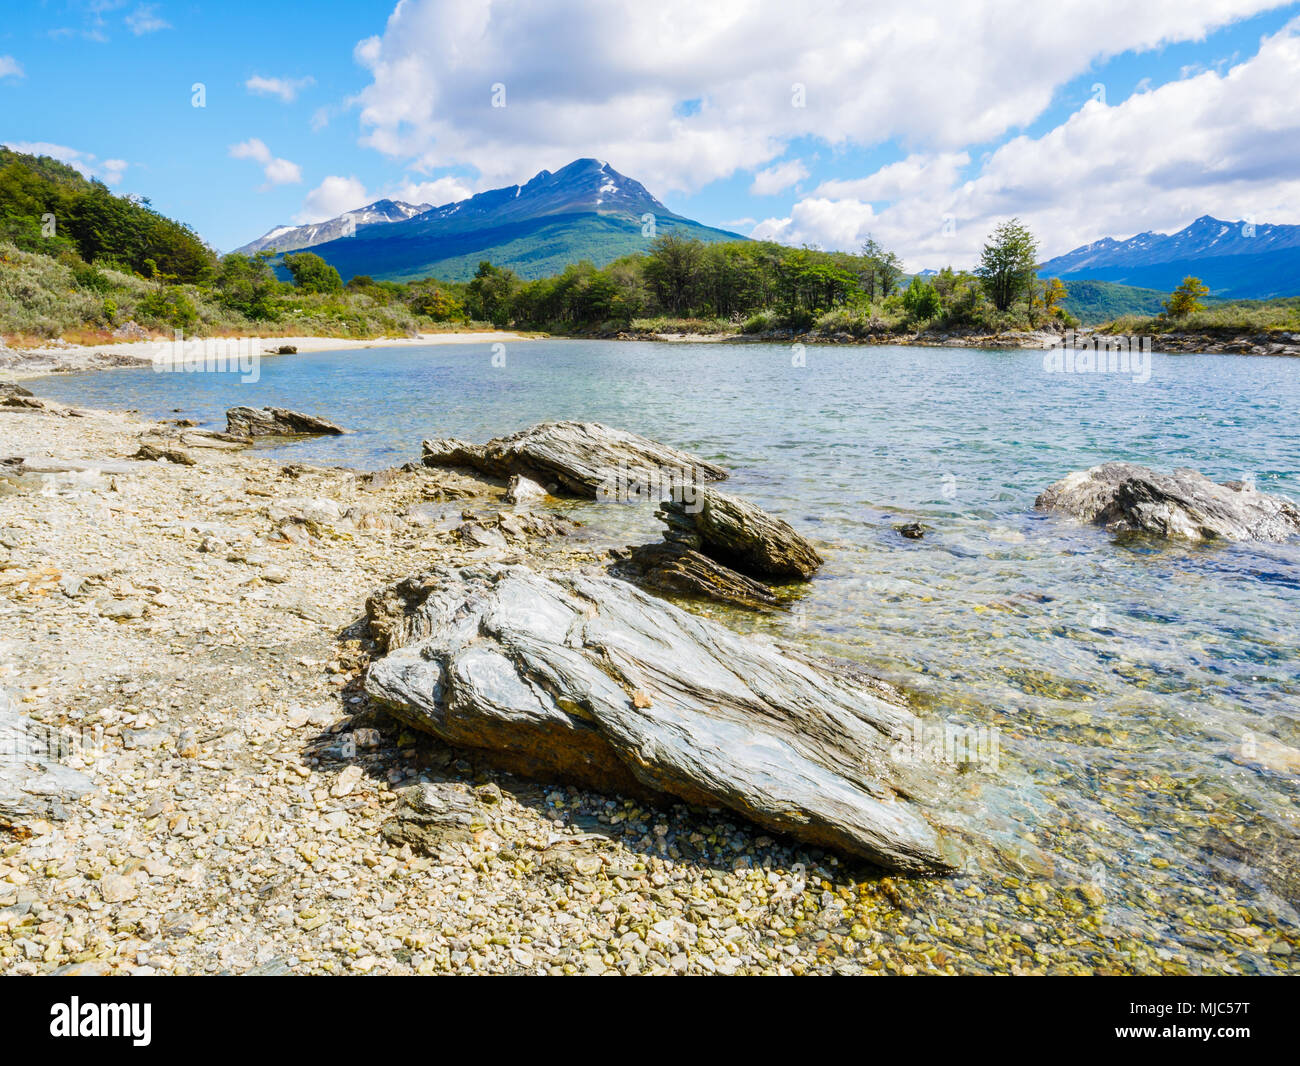 Stones on beach of Lapataia Bay with mountains in background, Terra del Fuego National Park near Ushuaia, Patagonia, Argentina Stock Photo